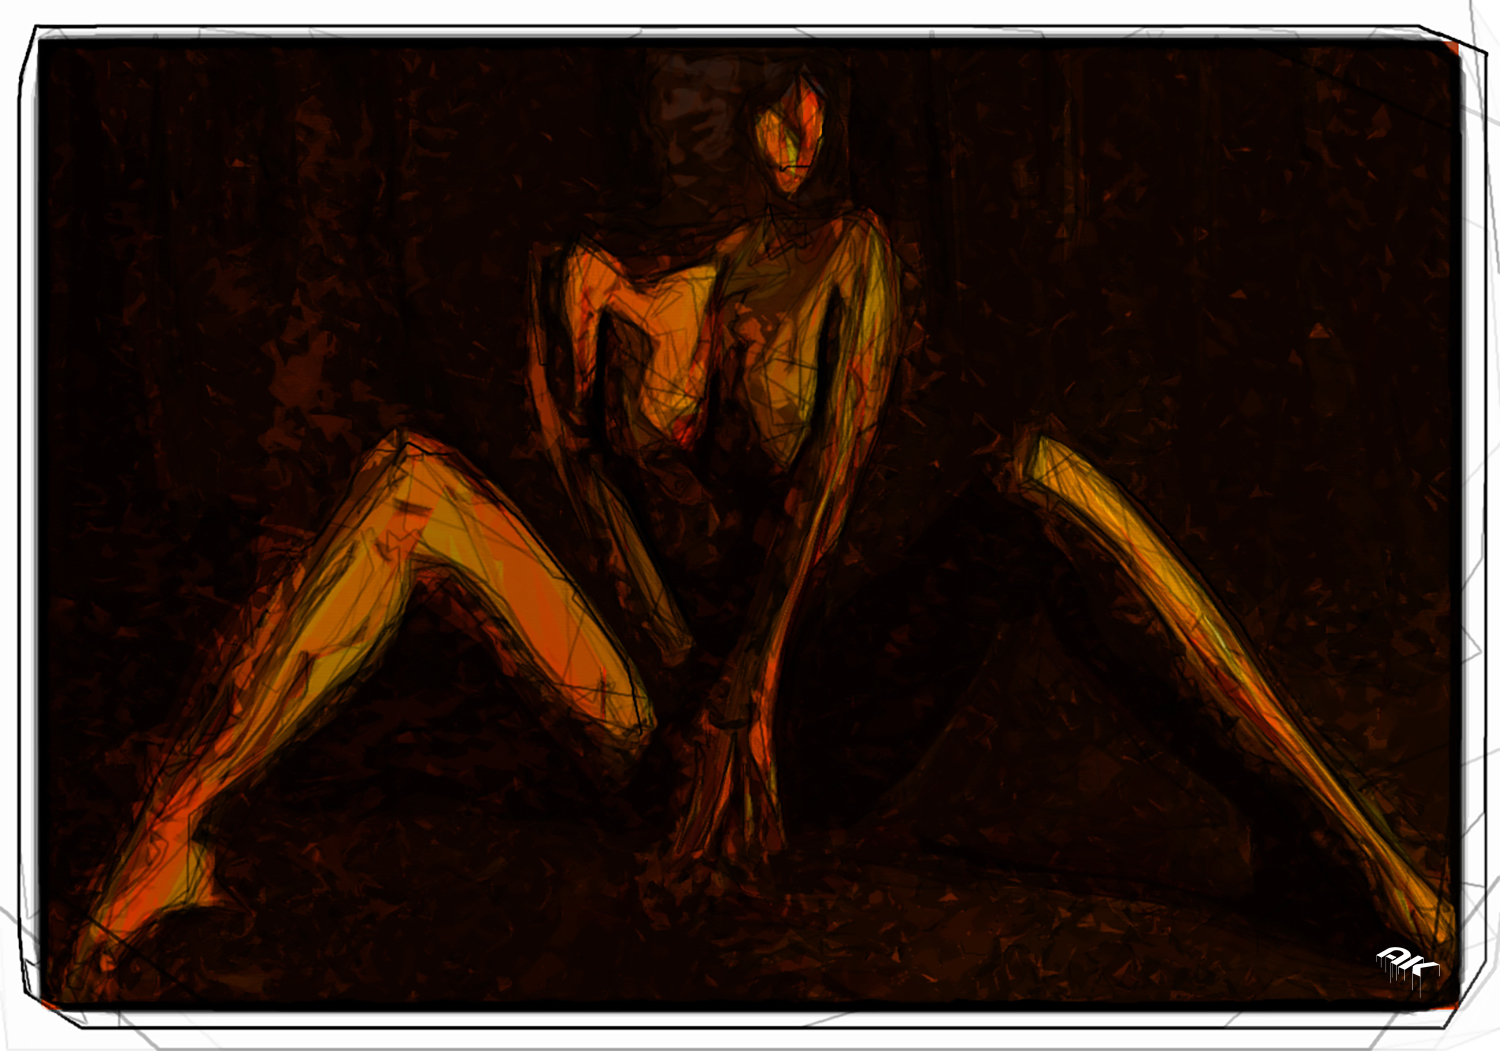 life-drawing-series-6-image-3-copyright-andrew-knutt